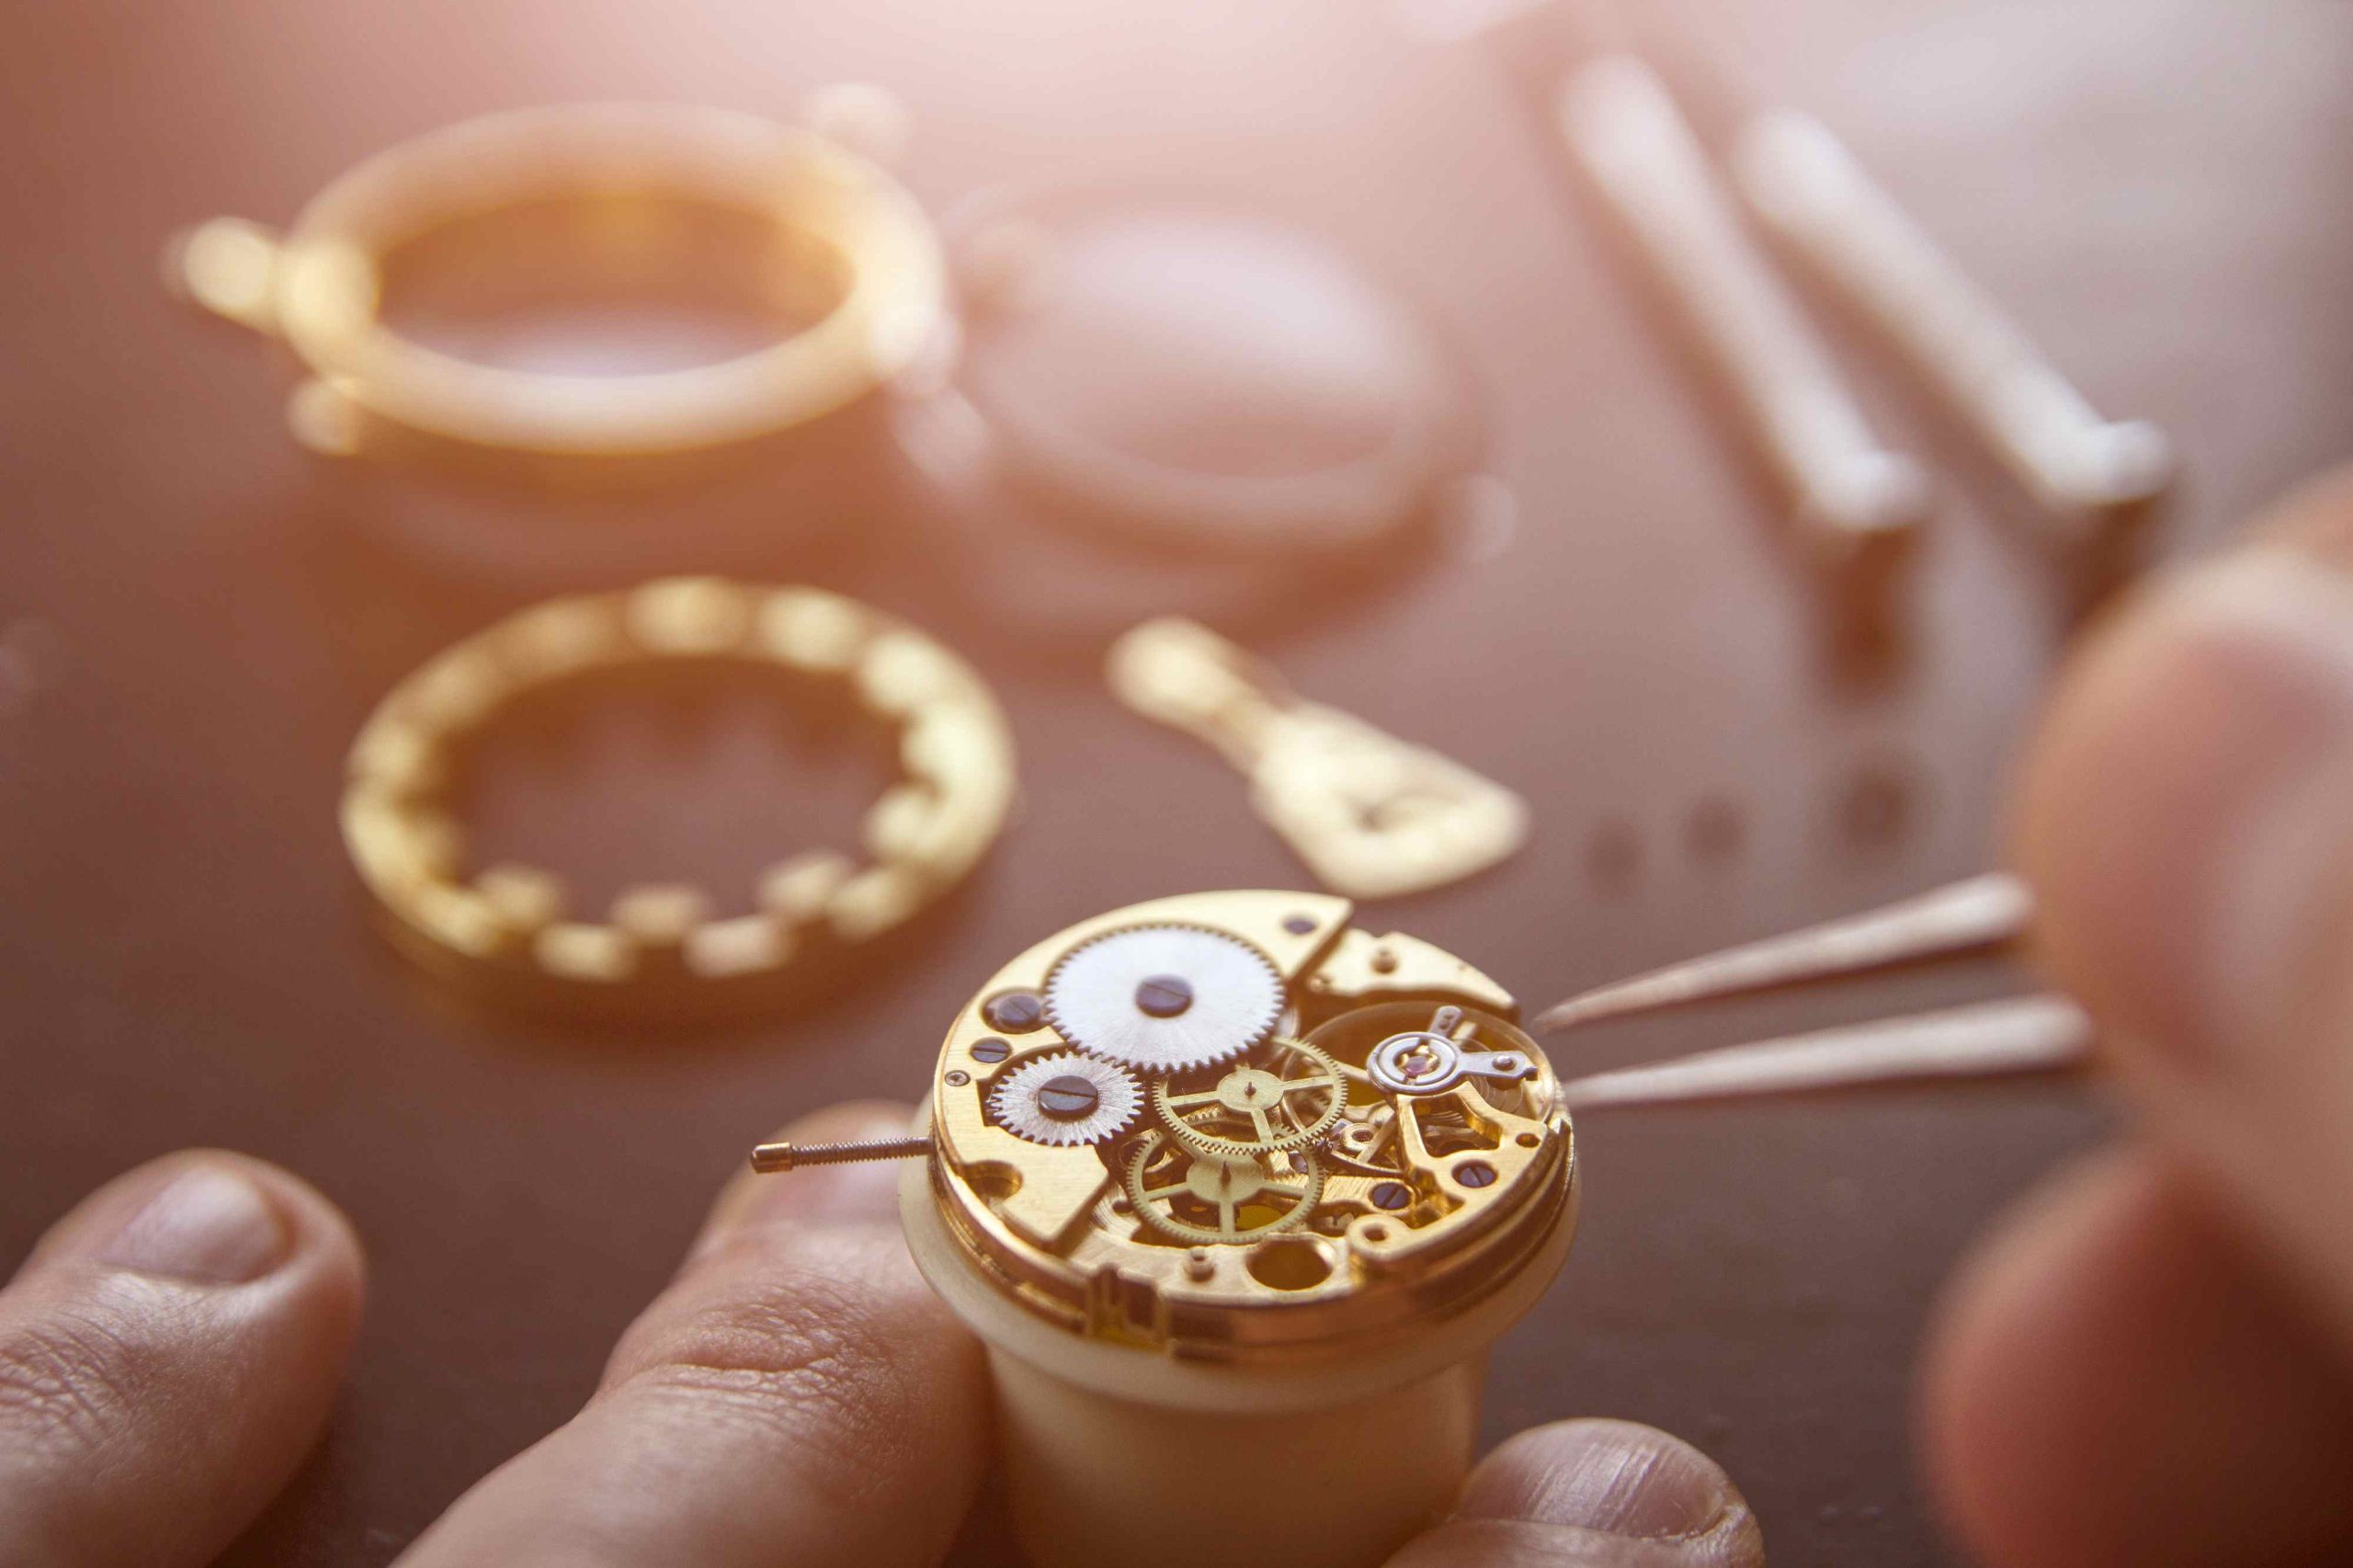 Watchmaking's Artistry